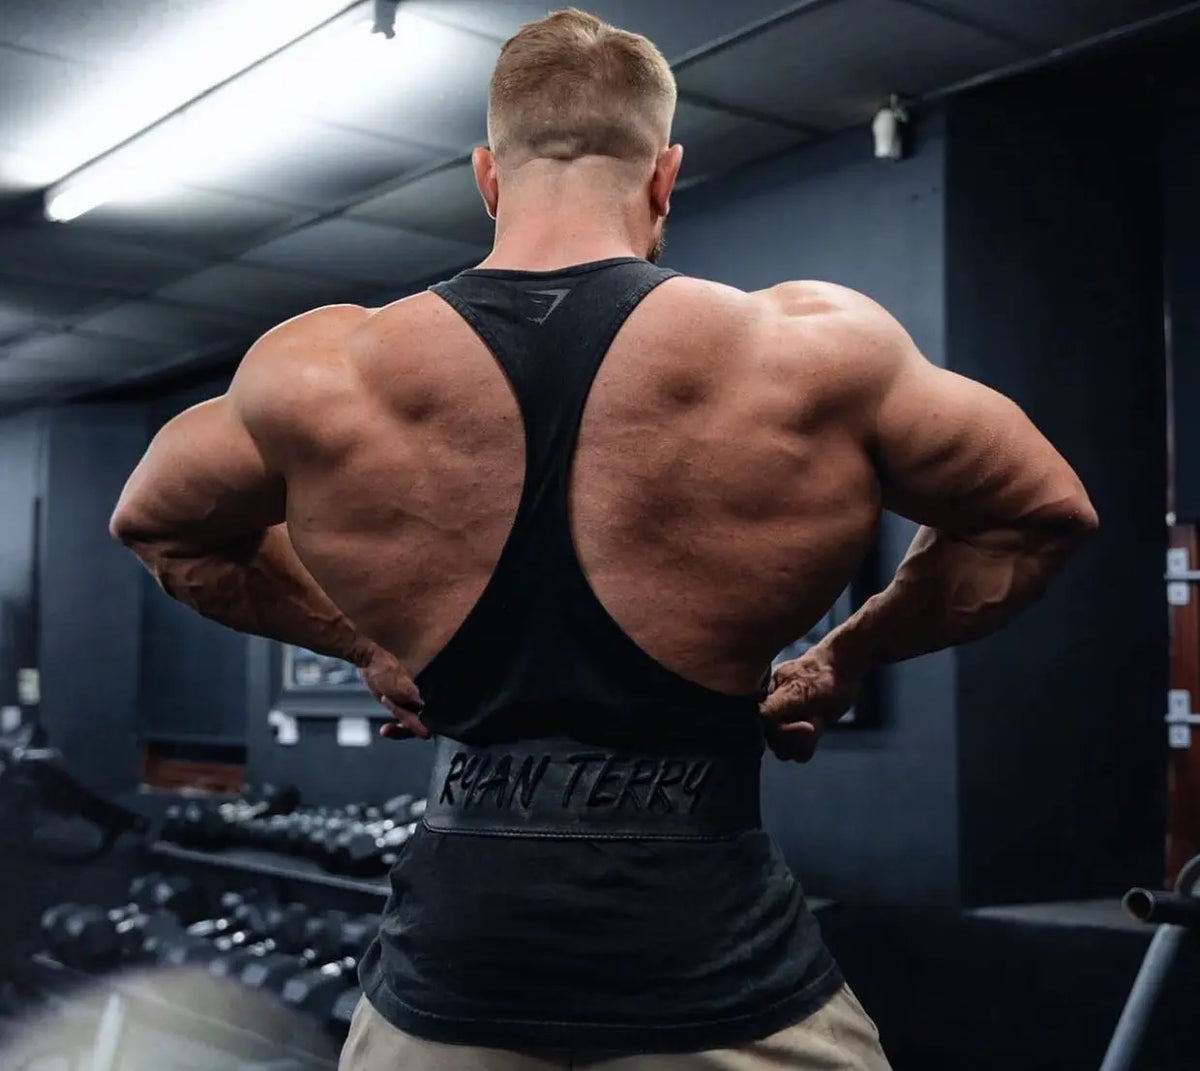 Top 5 back workouts for a thicker and wider back